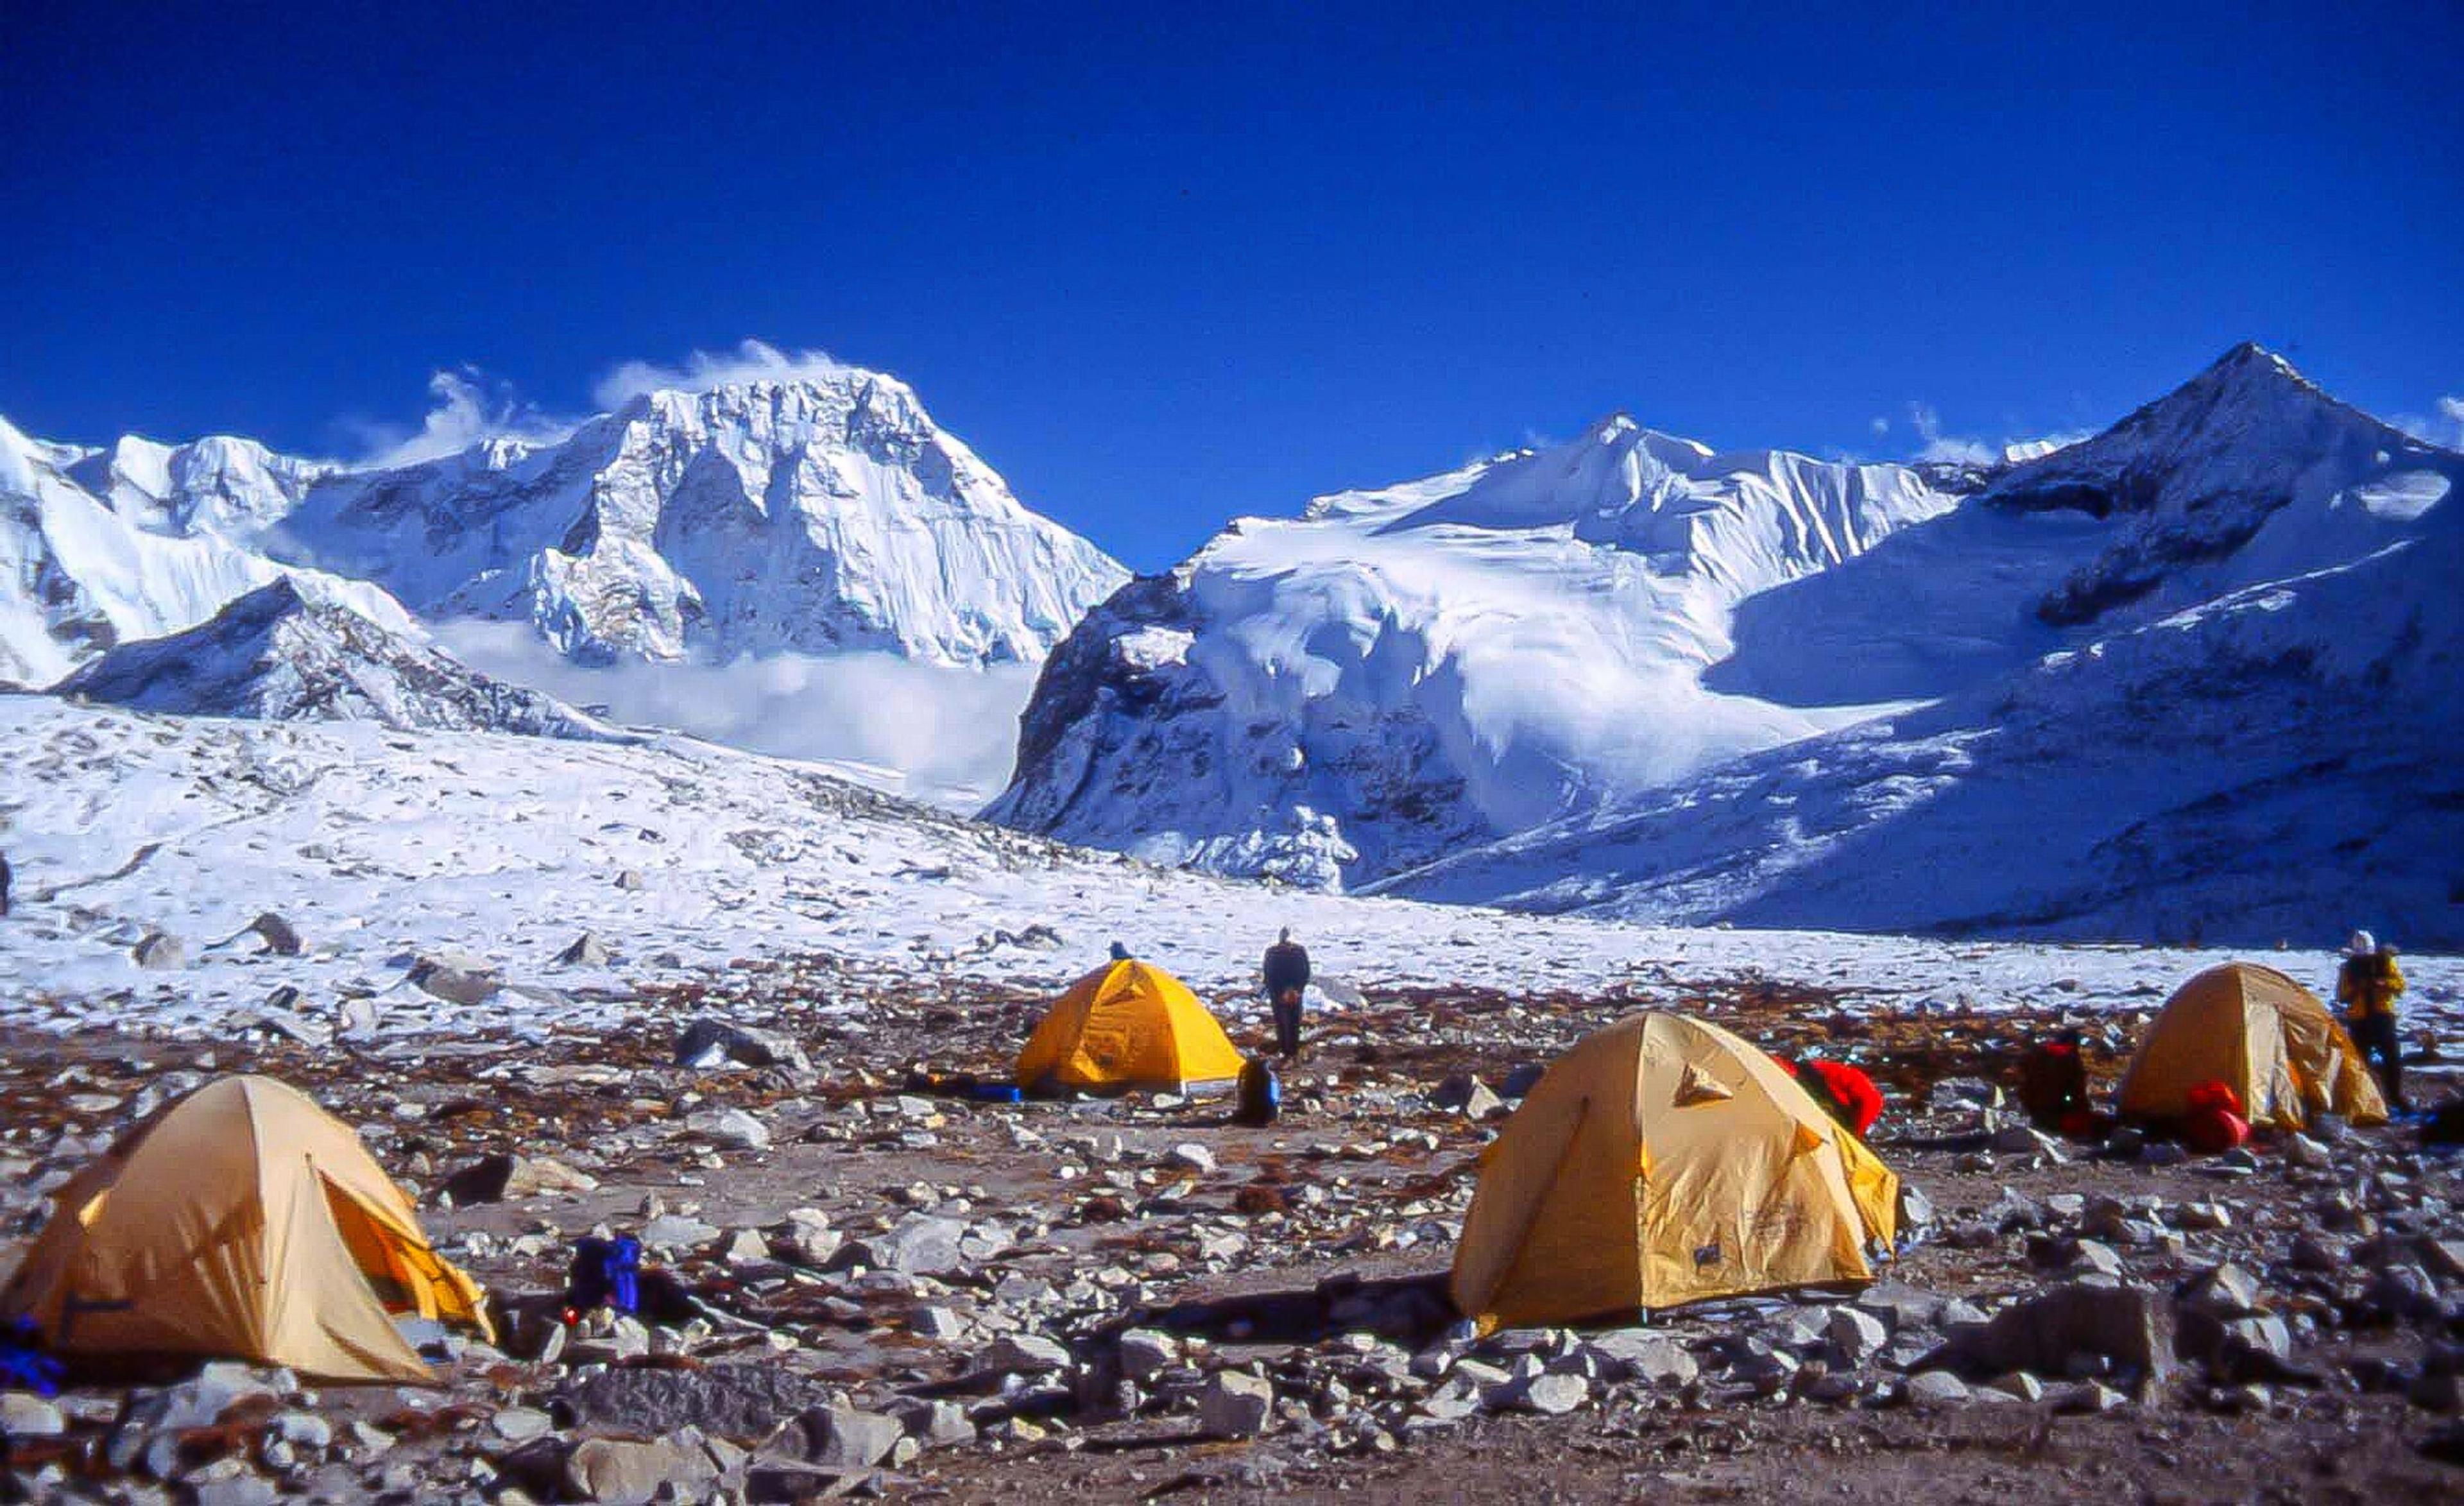 Orange tents dot a rugged base camp, dwarfed by the towering, snow-capped peaks stretching into the clear blue sky above.